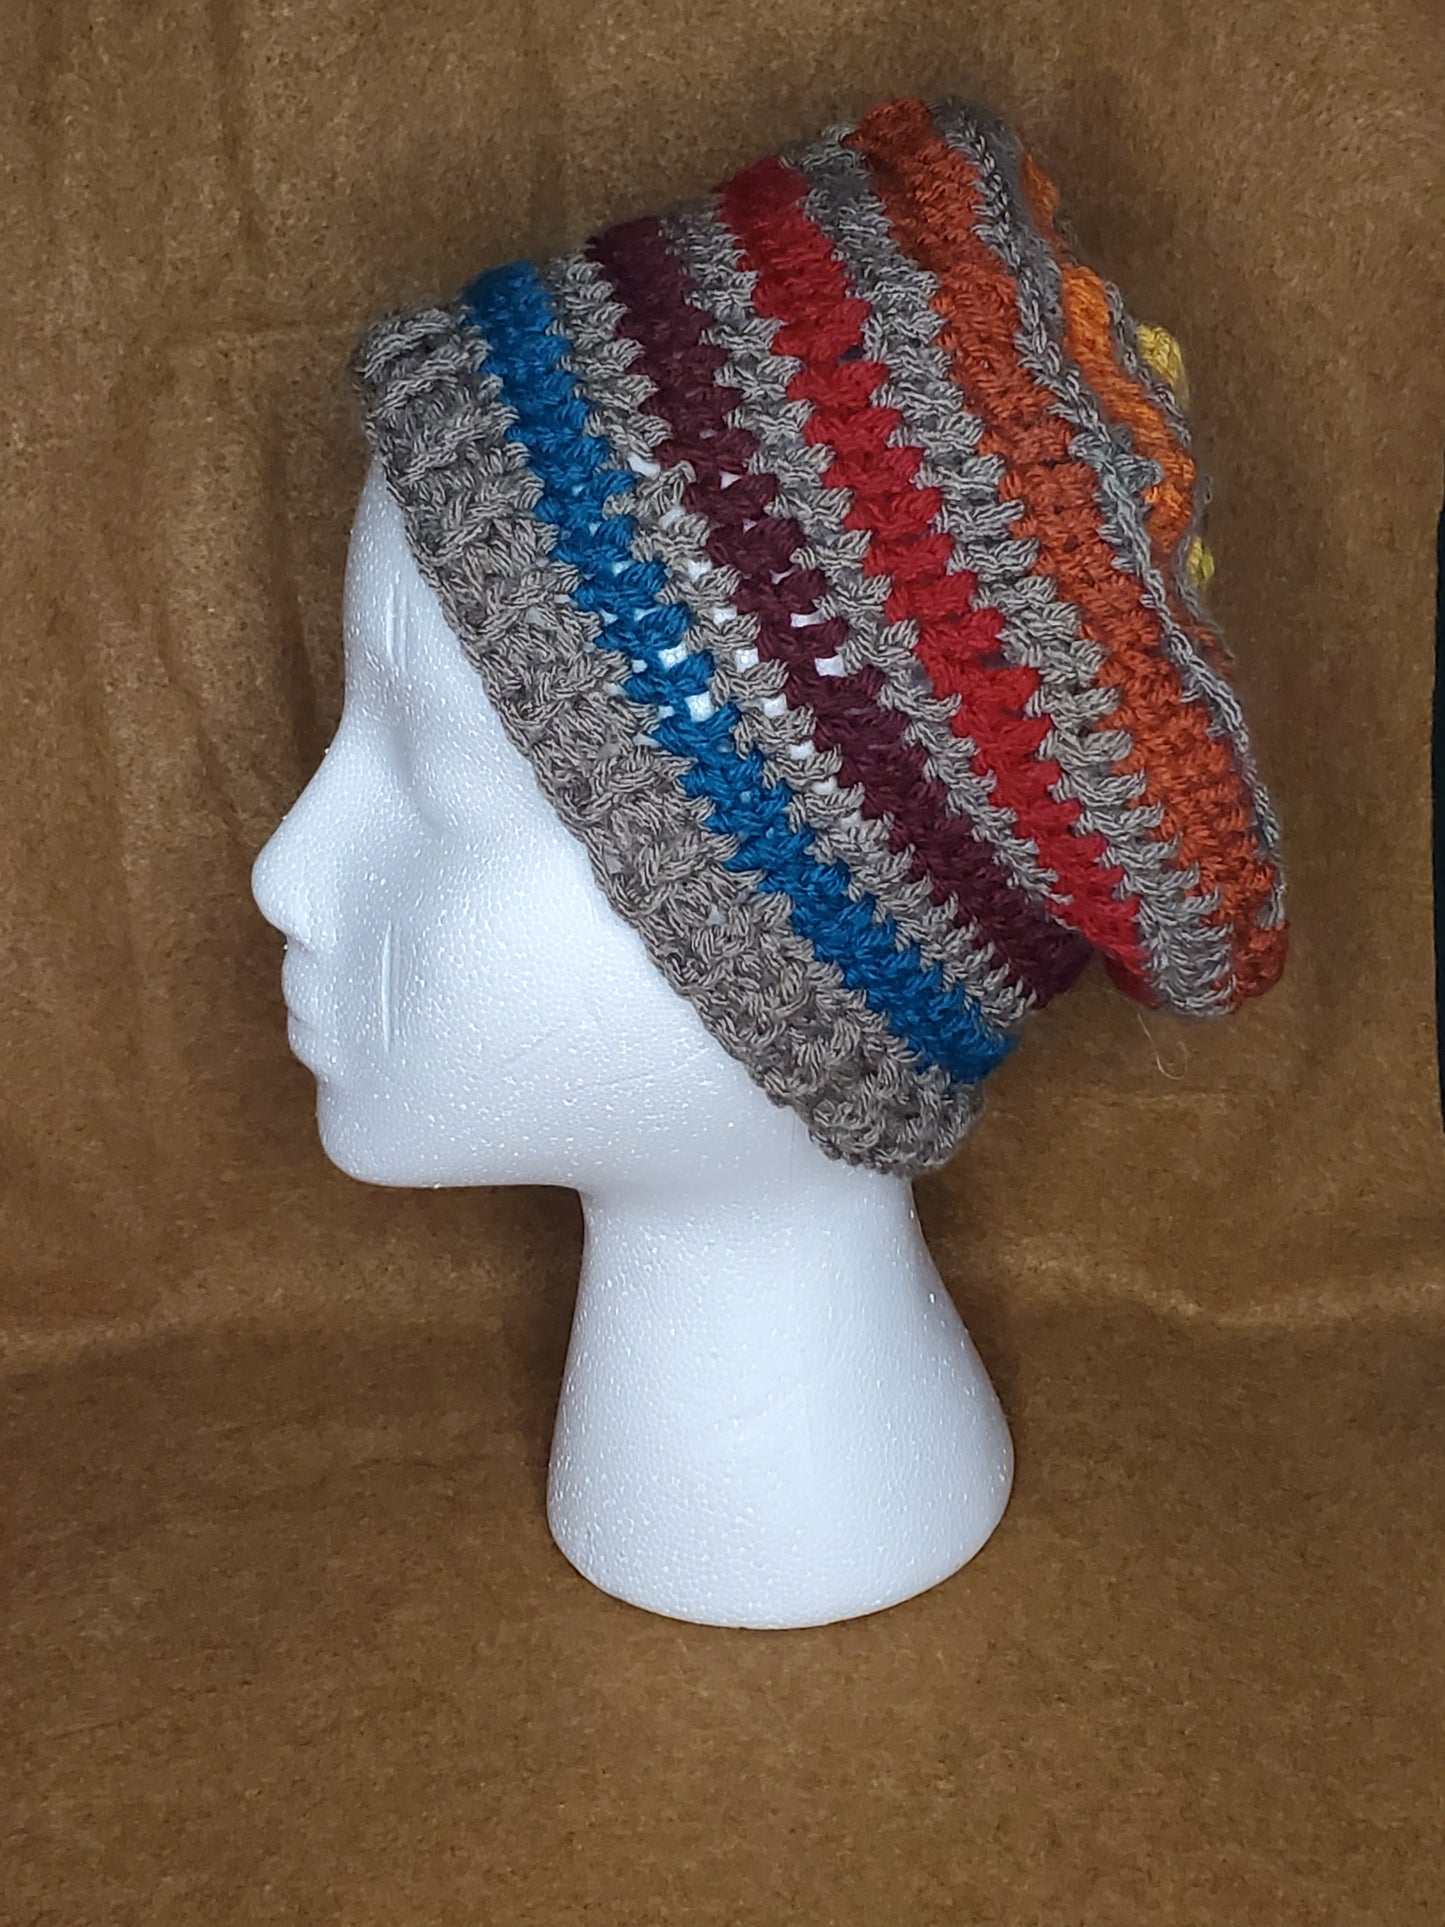 Pill box style - orange, red, taupe / fall colors crocheted hat